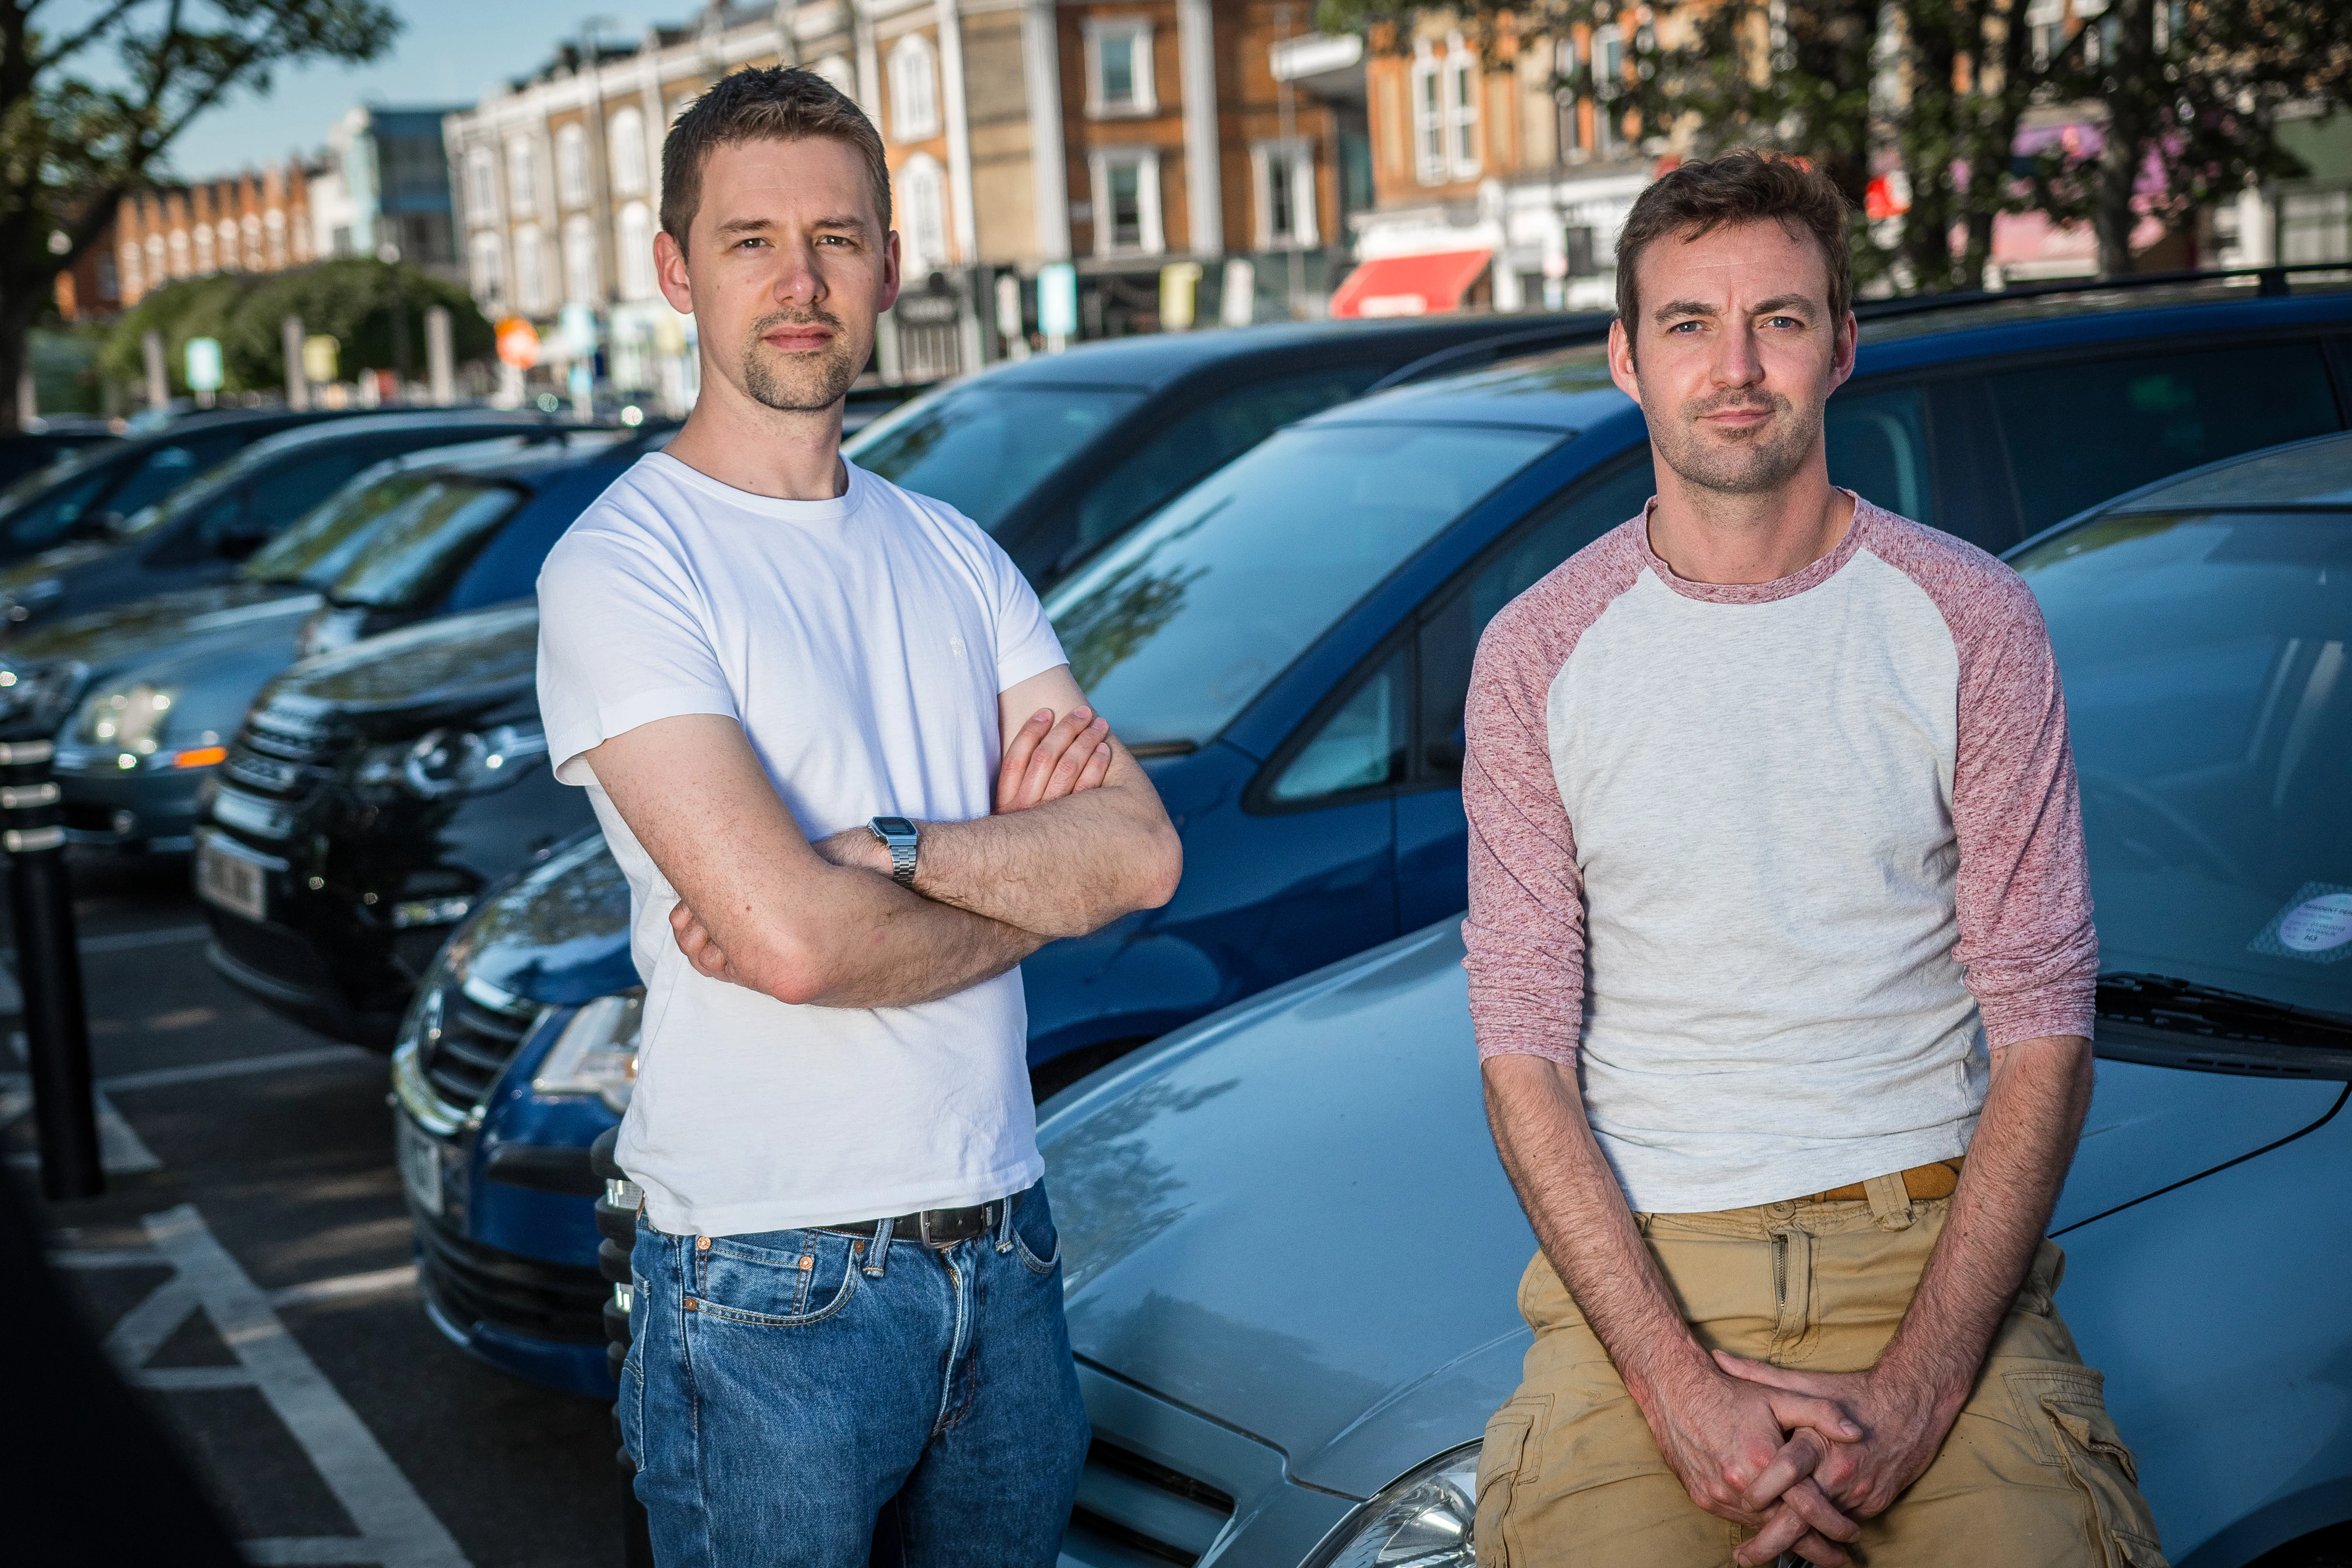 By Miles co-founders James Blackham (left) and Callum Rimmer